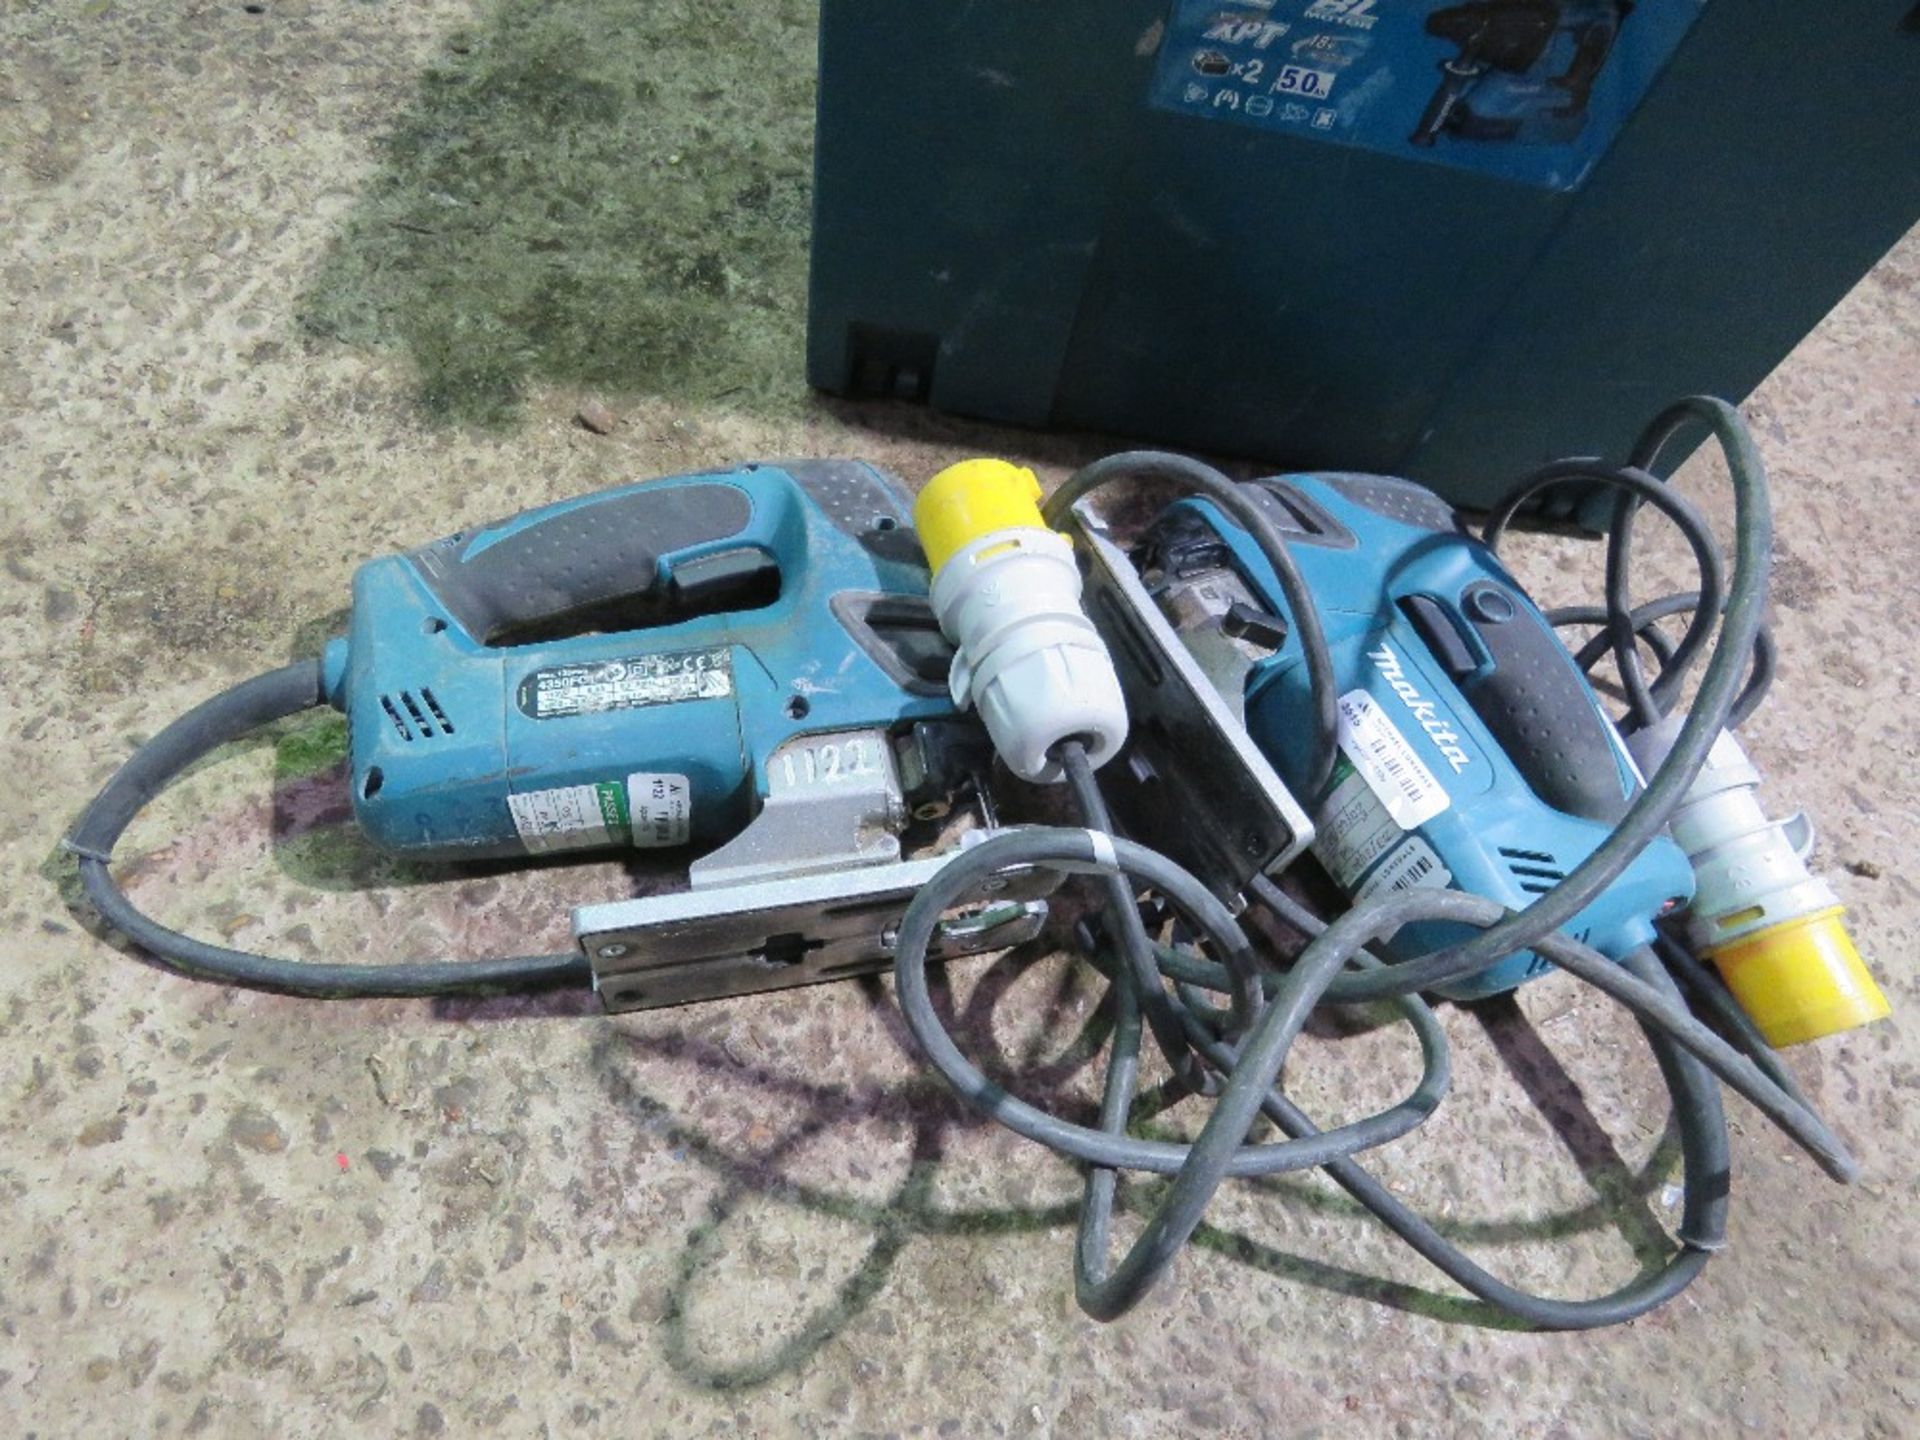 2X MAKITA 110V JIGSAWS SOURCED FROM LARGE CONSTRUCTION COMPANY LIQUIDATION. - Image 3 of 4